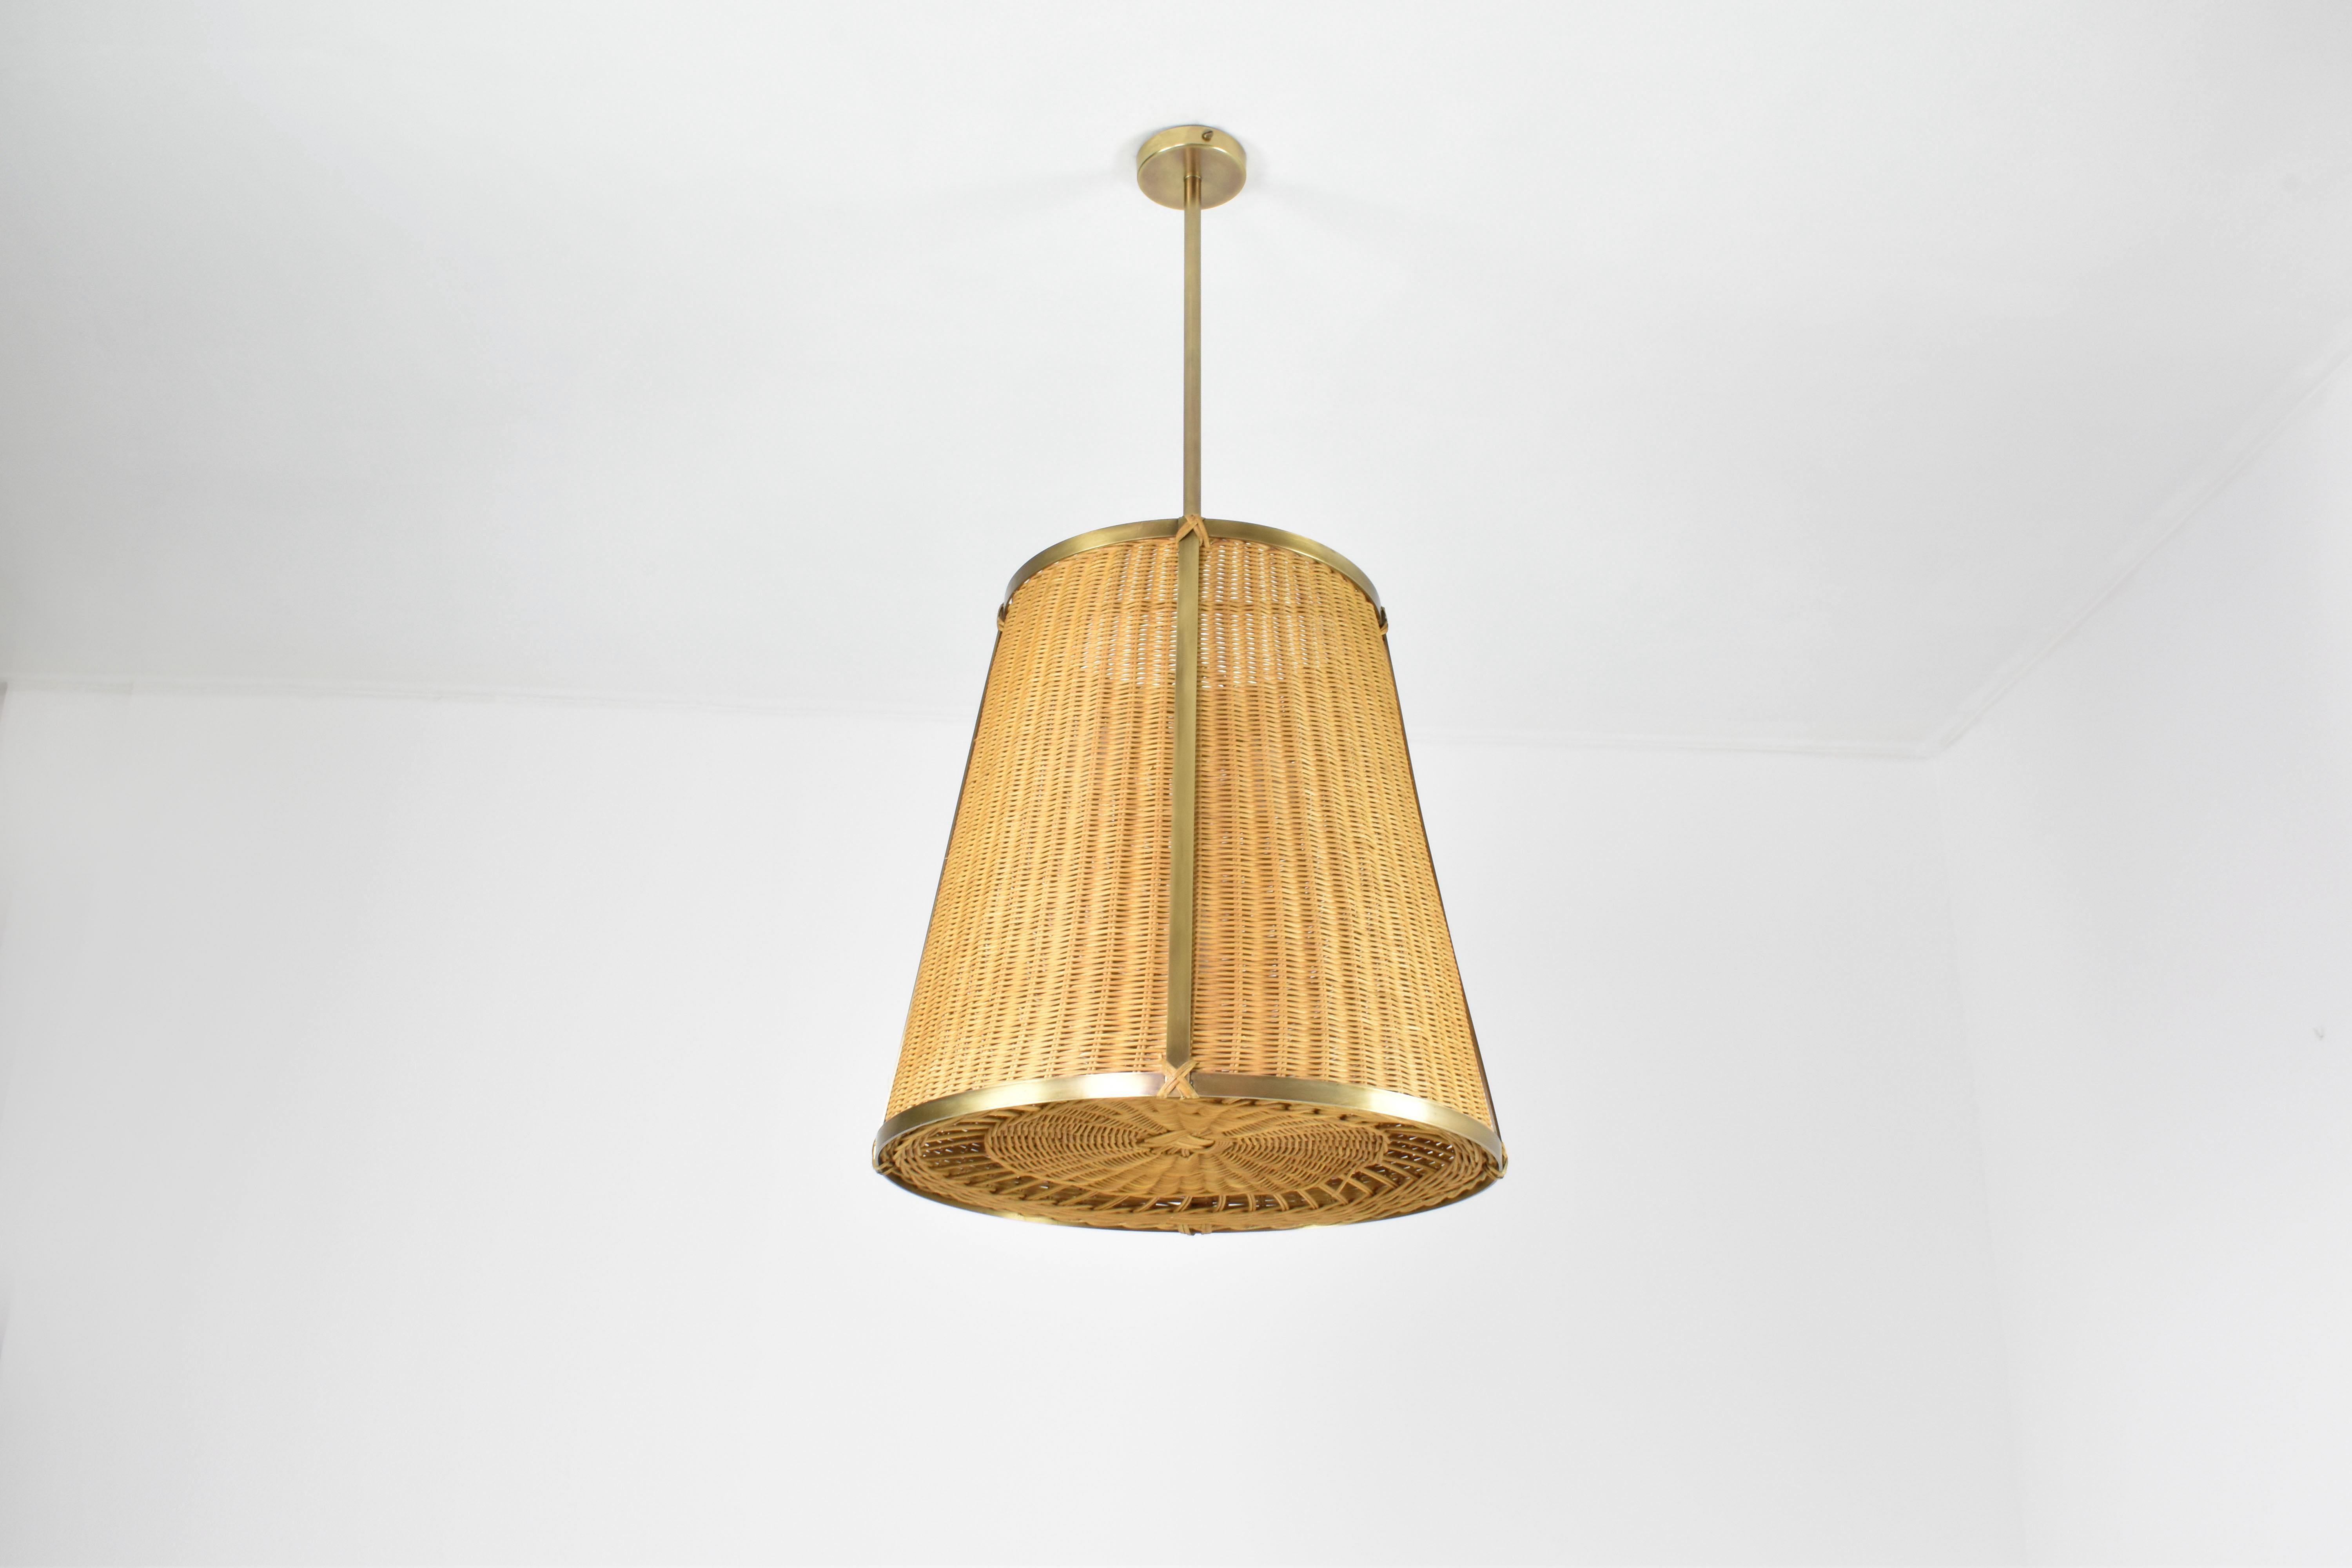 Caeli-SD Handcrafted Brass Rattan Pendant Light Fixture, Flow Collection In New Condition For Sale In Paris, FR